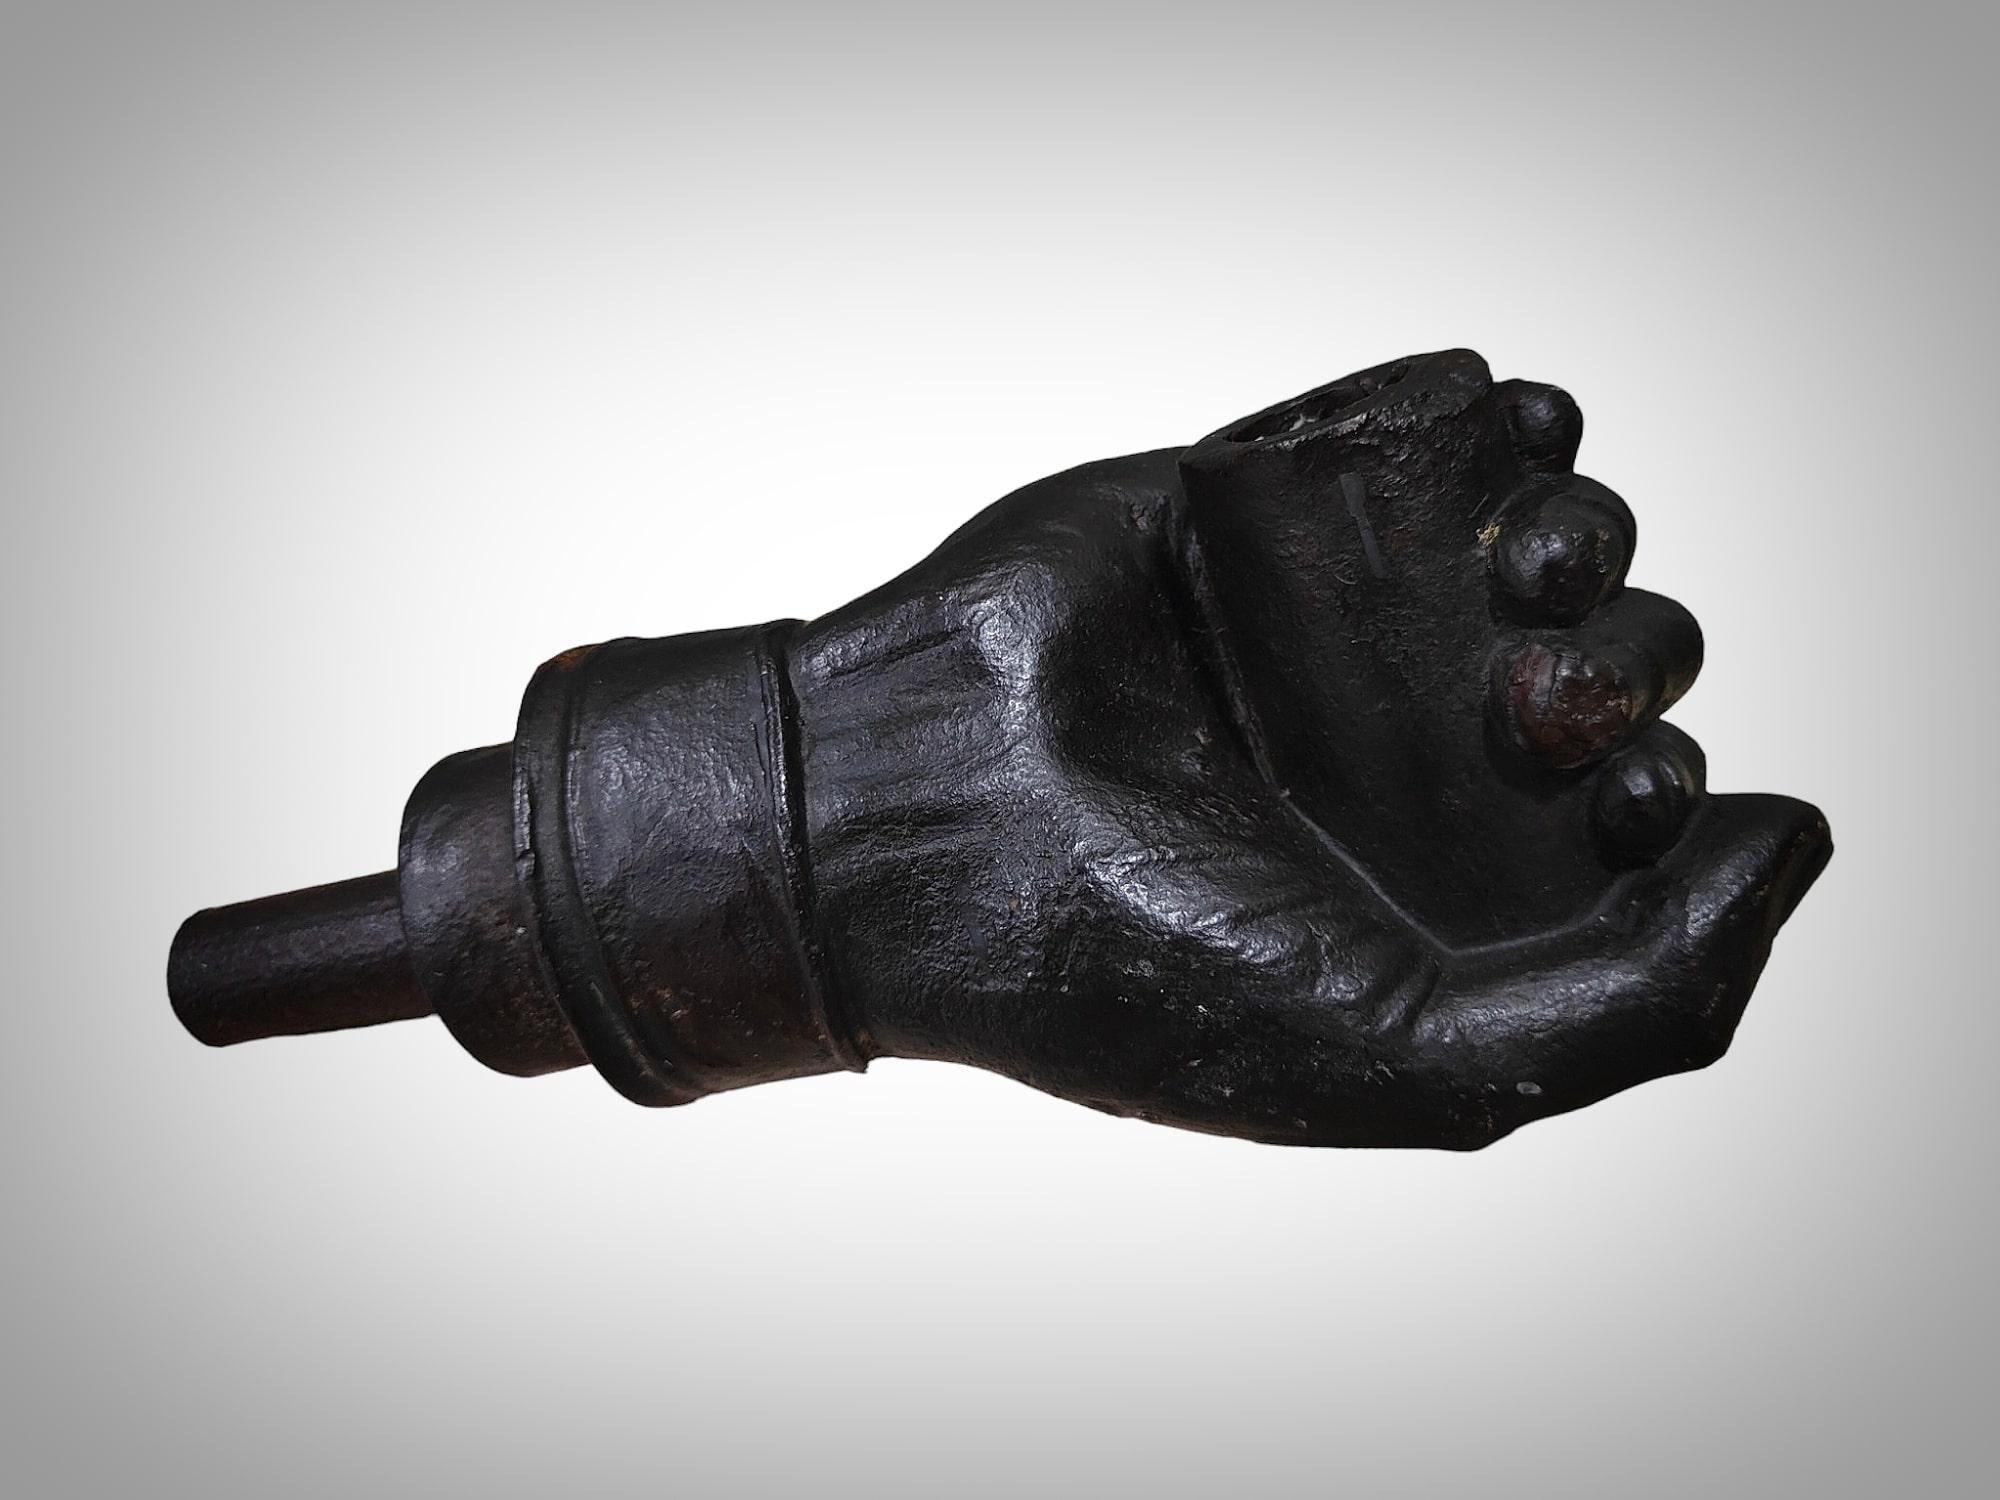 Forged Iron Hand Sculpture - Elegant Artisan-Crafted Piece at the Forge by a Mas 1